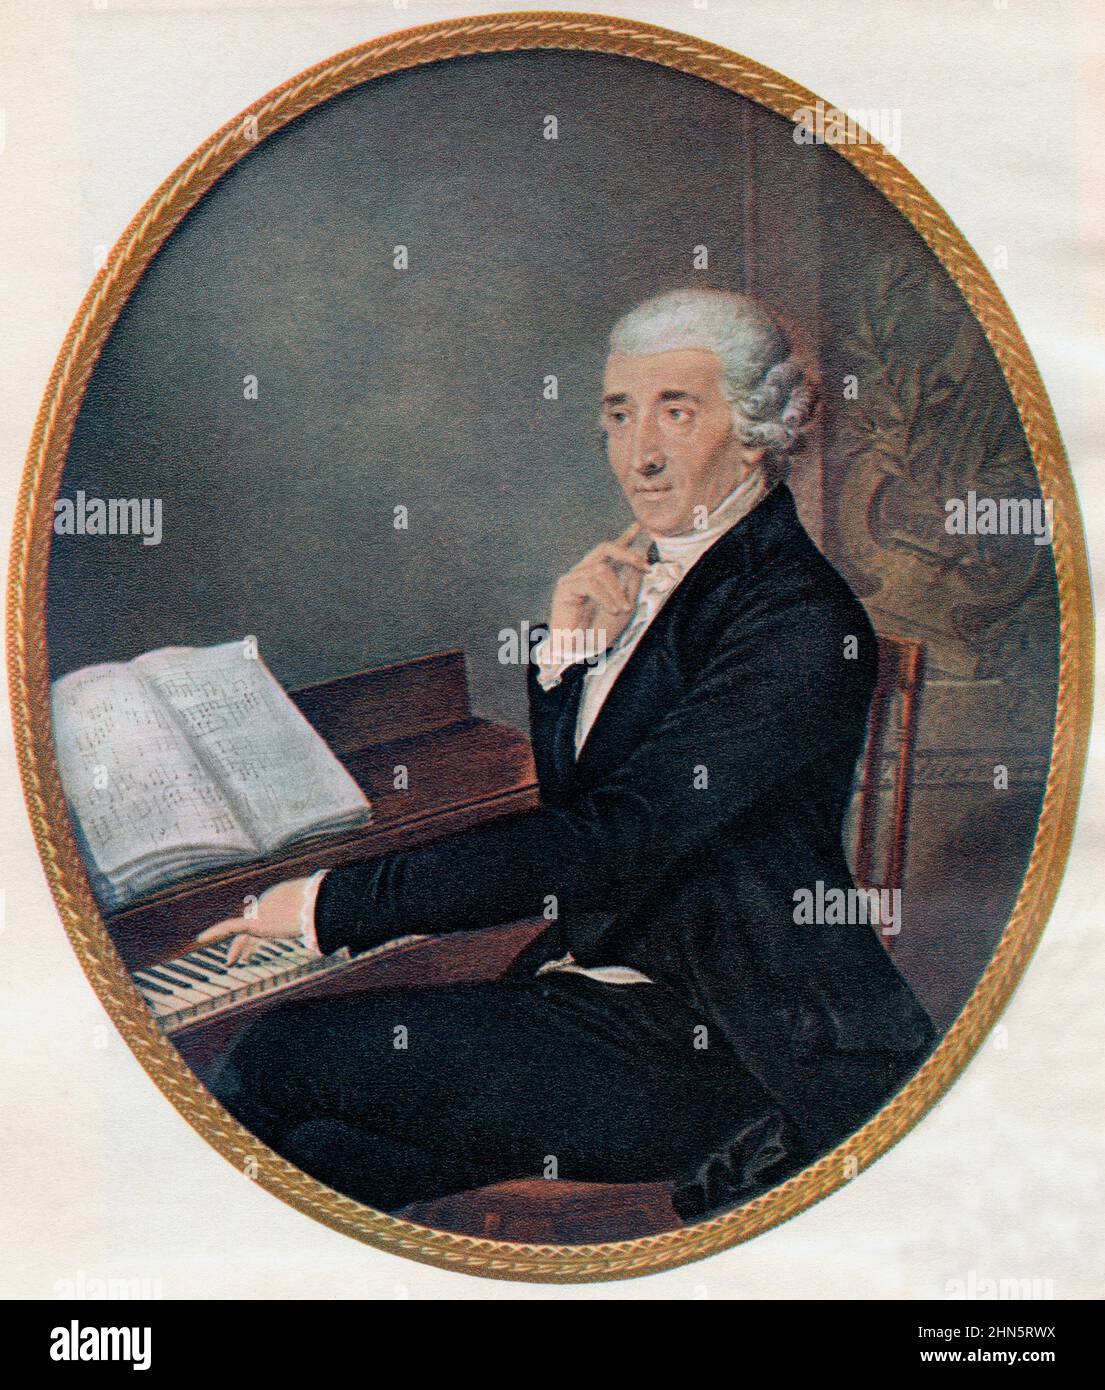 Franz Joseph Haydn, 1732 – 1809. Austrian composer of the Classical period.  From The Golden Age of Vienna, published 1948. Stock Photo